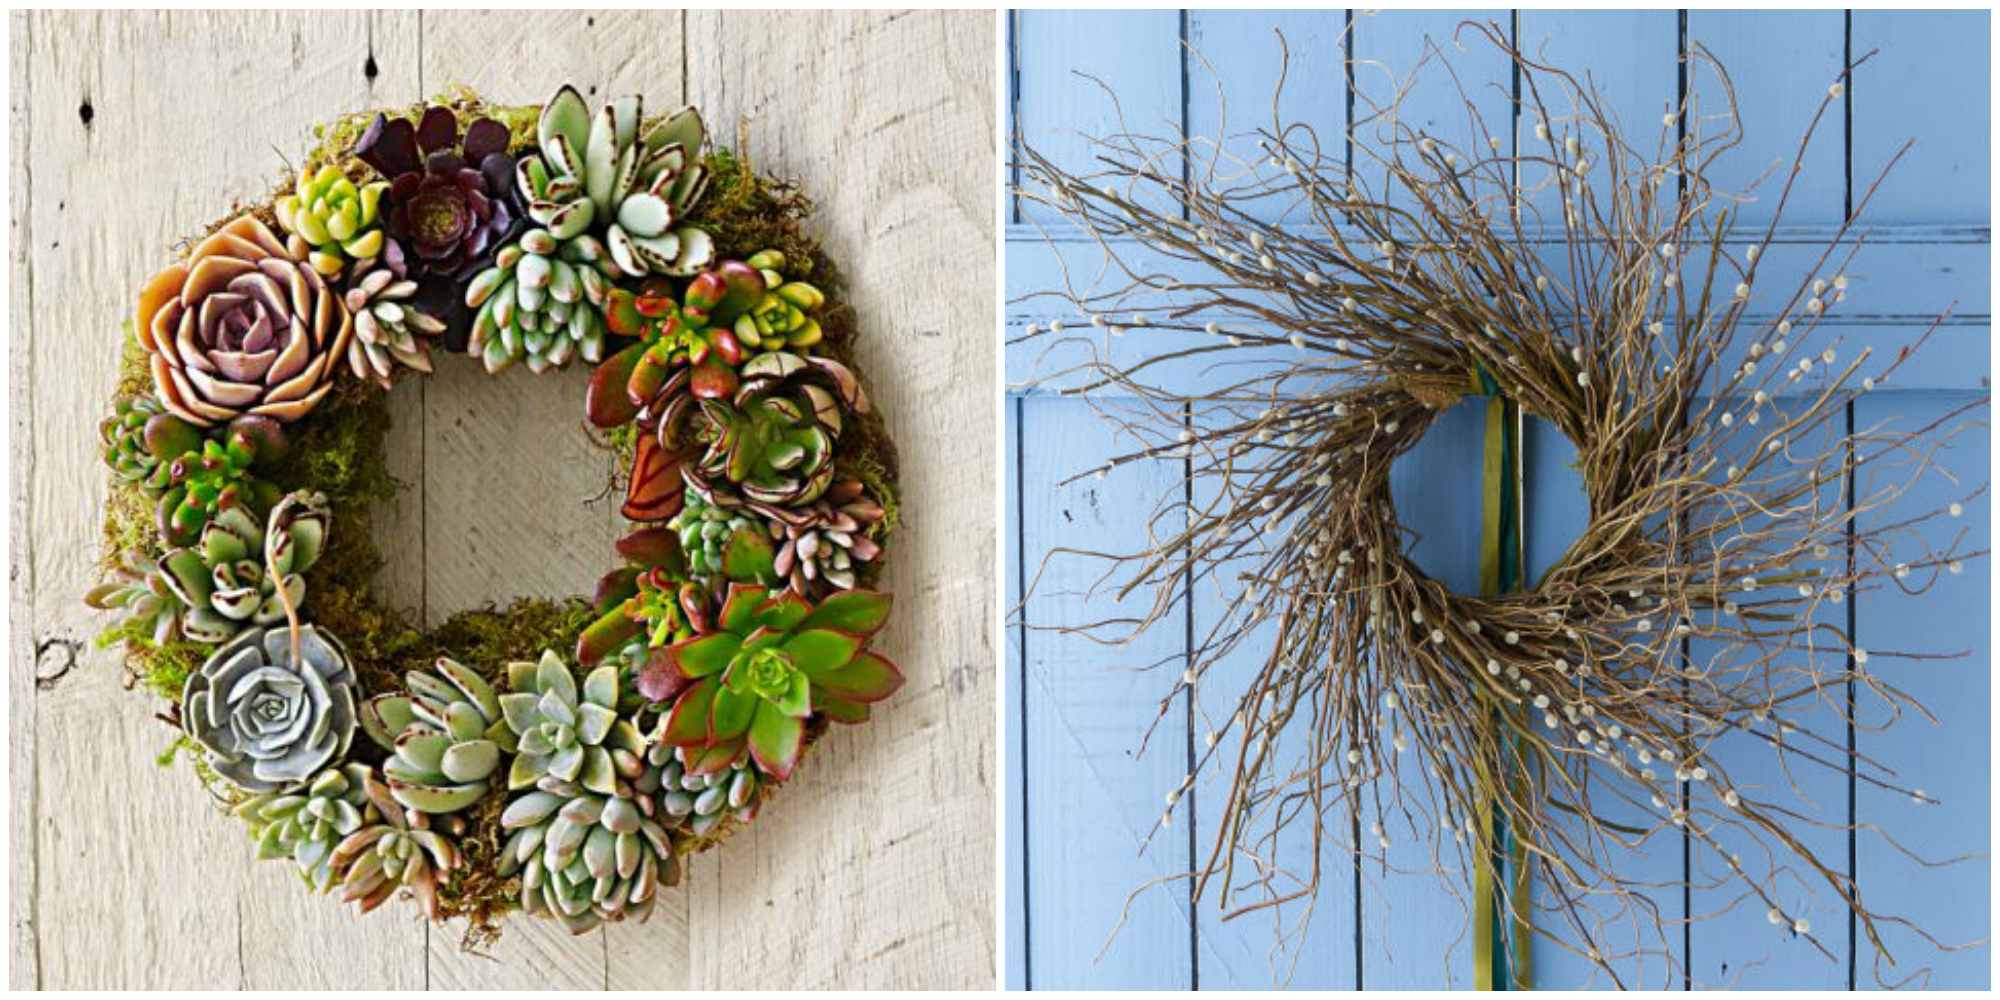 trend-decoration-holiday-wreath-ideas-christmas-for-fresh-and-spring-wreaths-easter-door-decorations-photos-business-card-design-cake_home-christmas-decorations_interior-home-decor